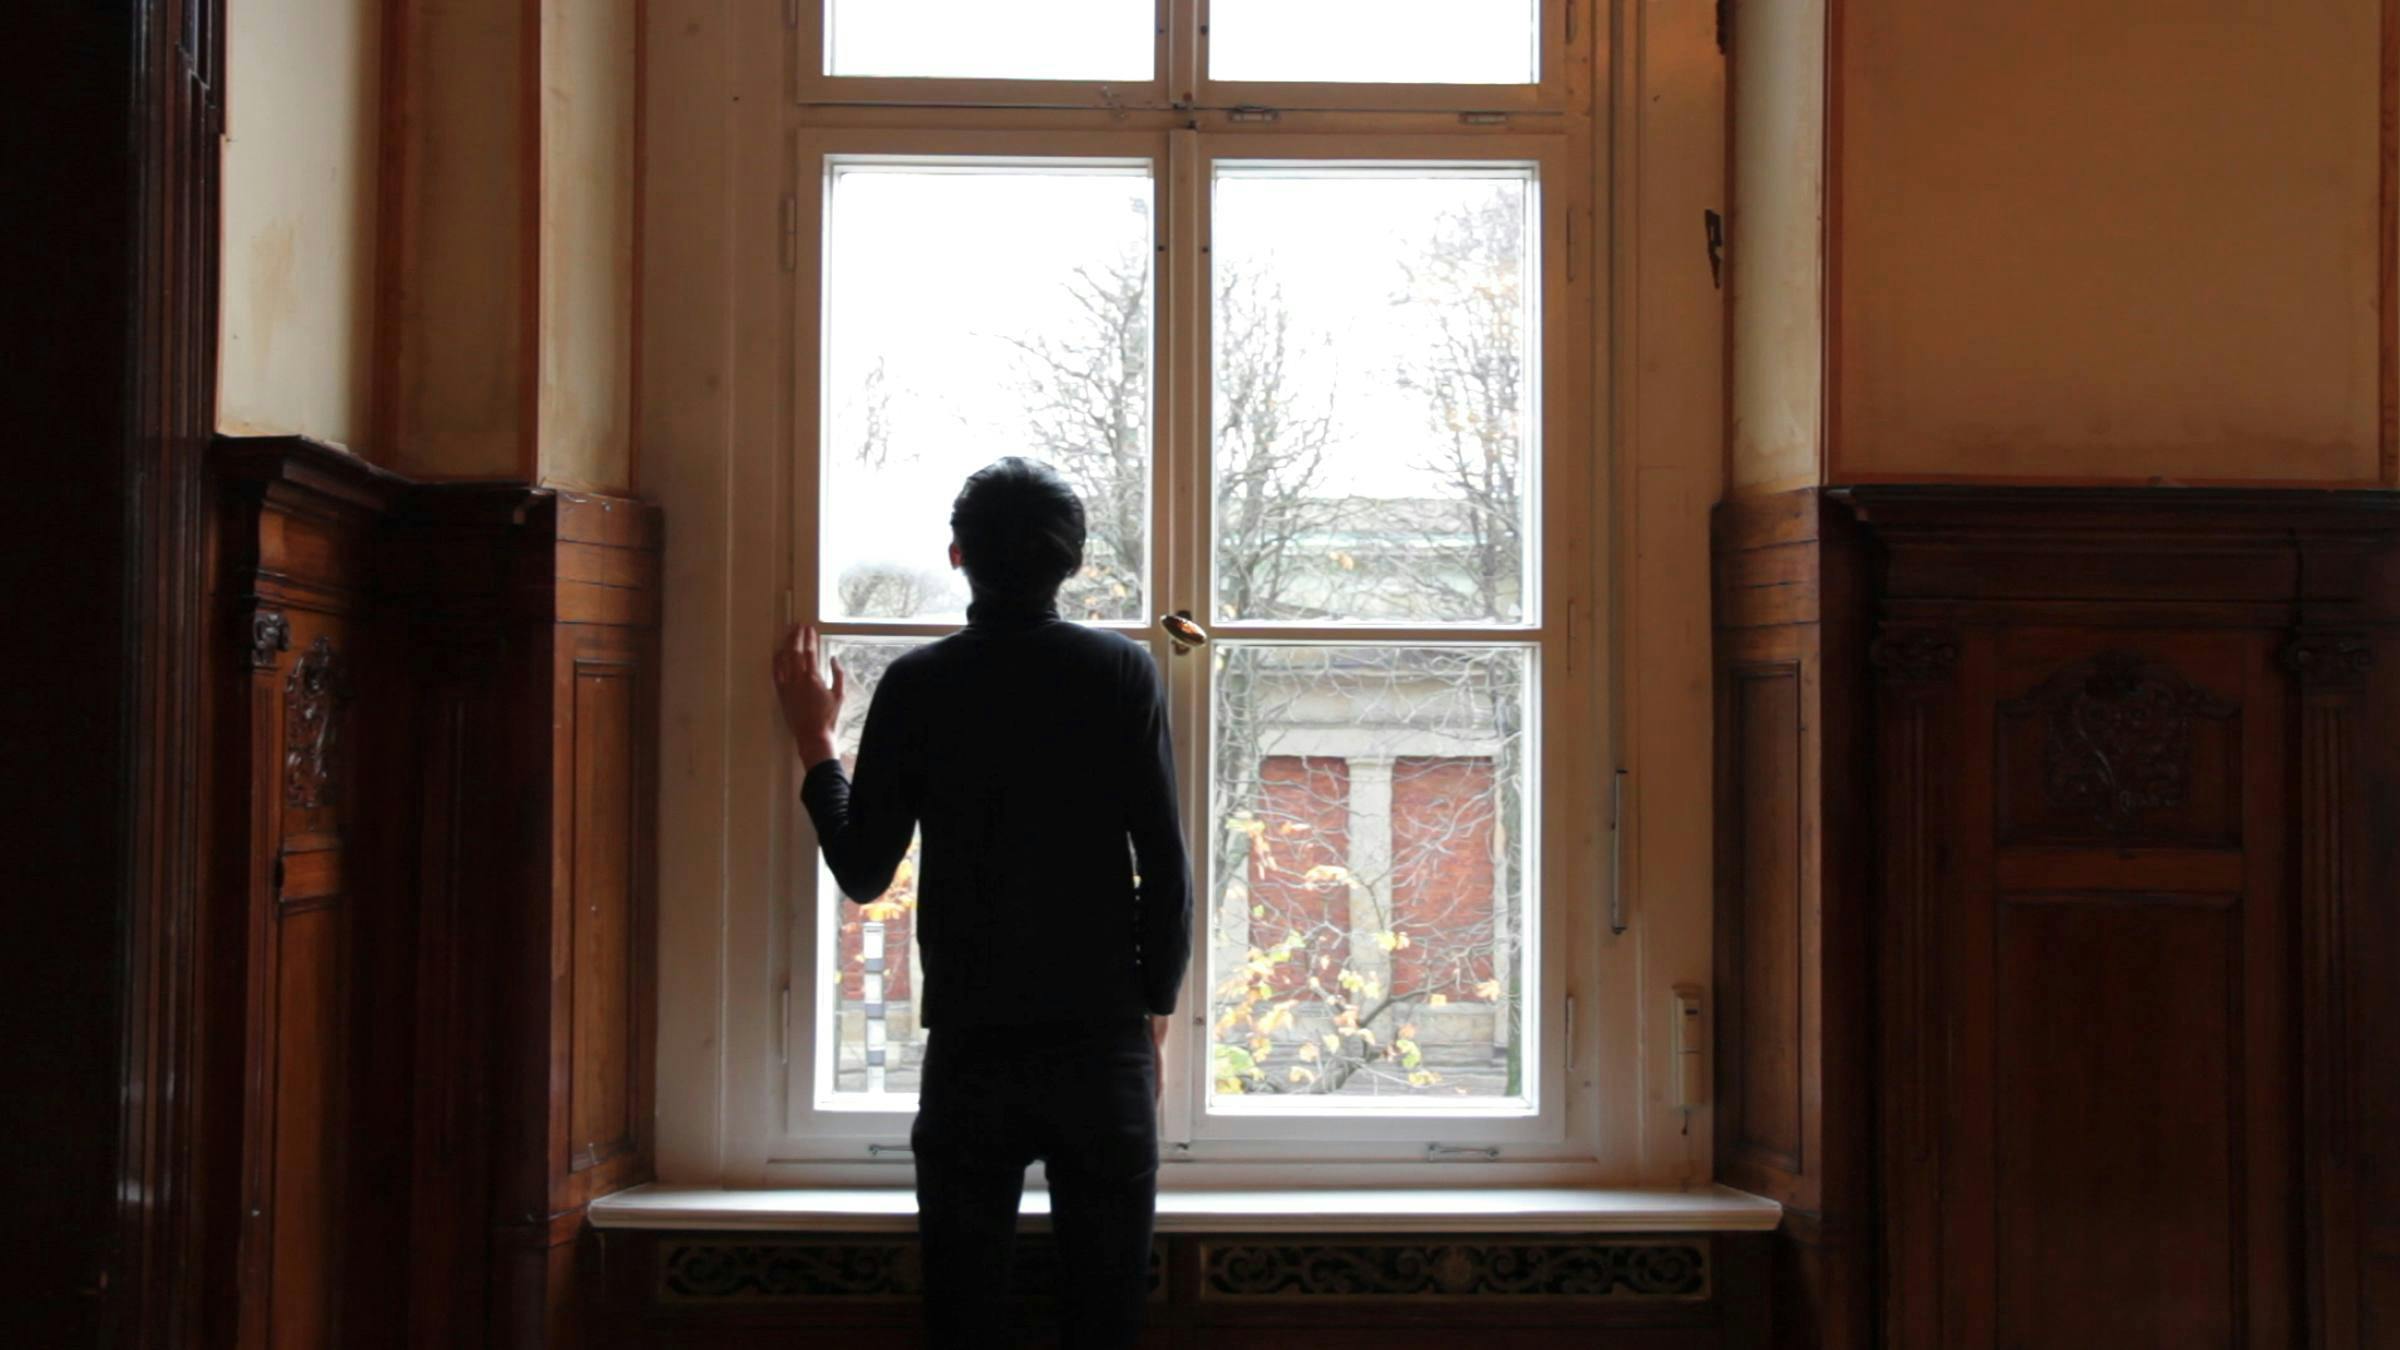 an image of the artist standing at a window 